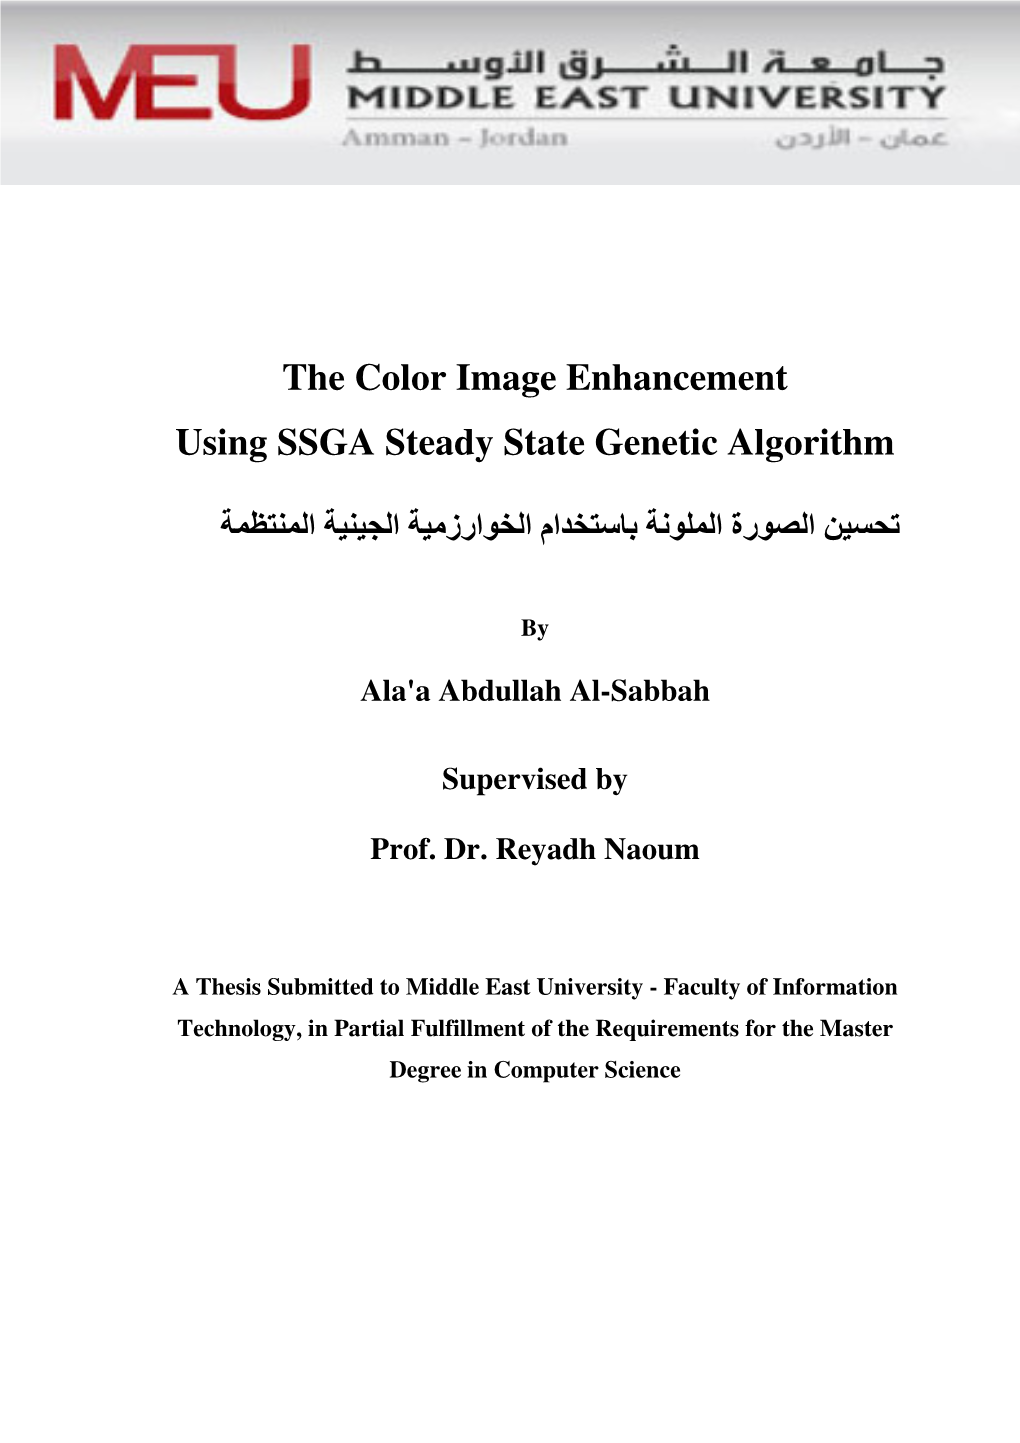 The Color Image Enhancement Using SSGA Steady State Genetic Algorithm